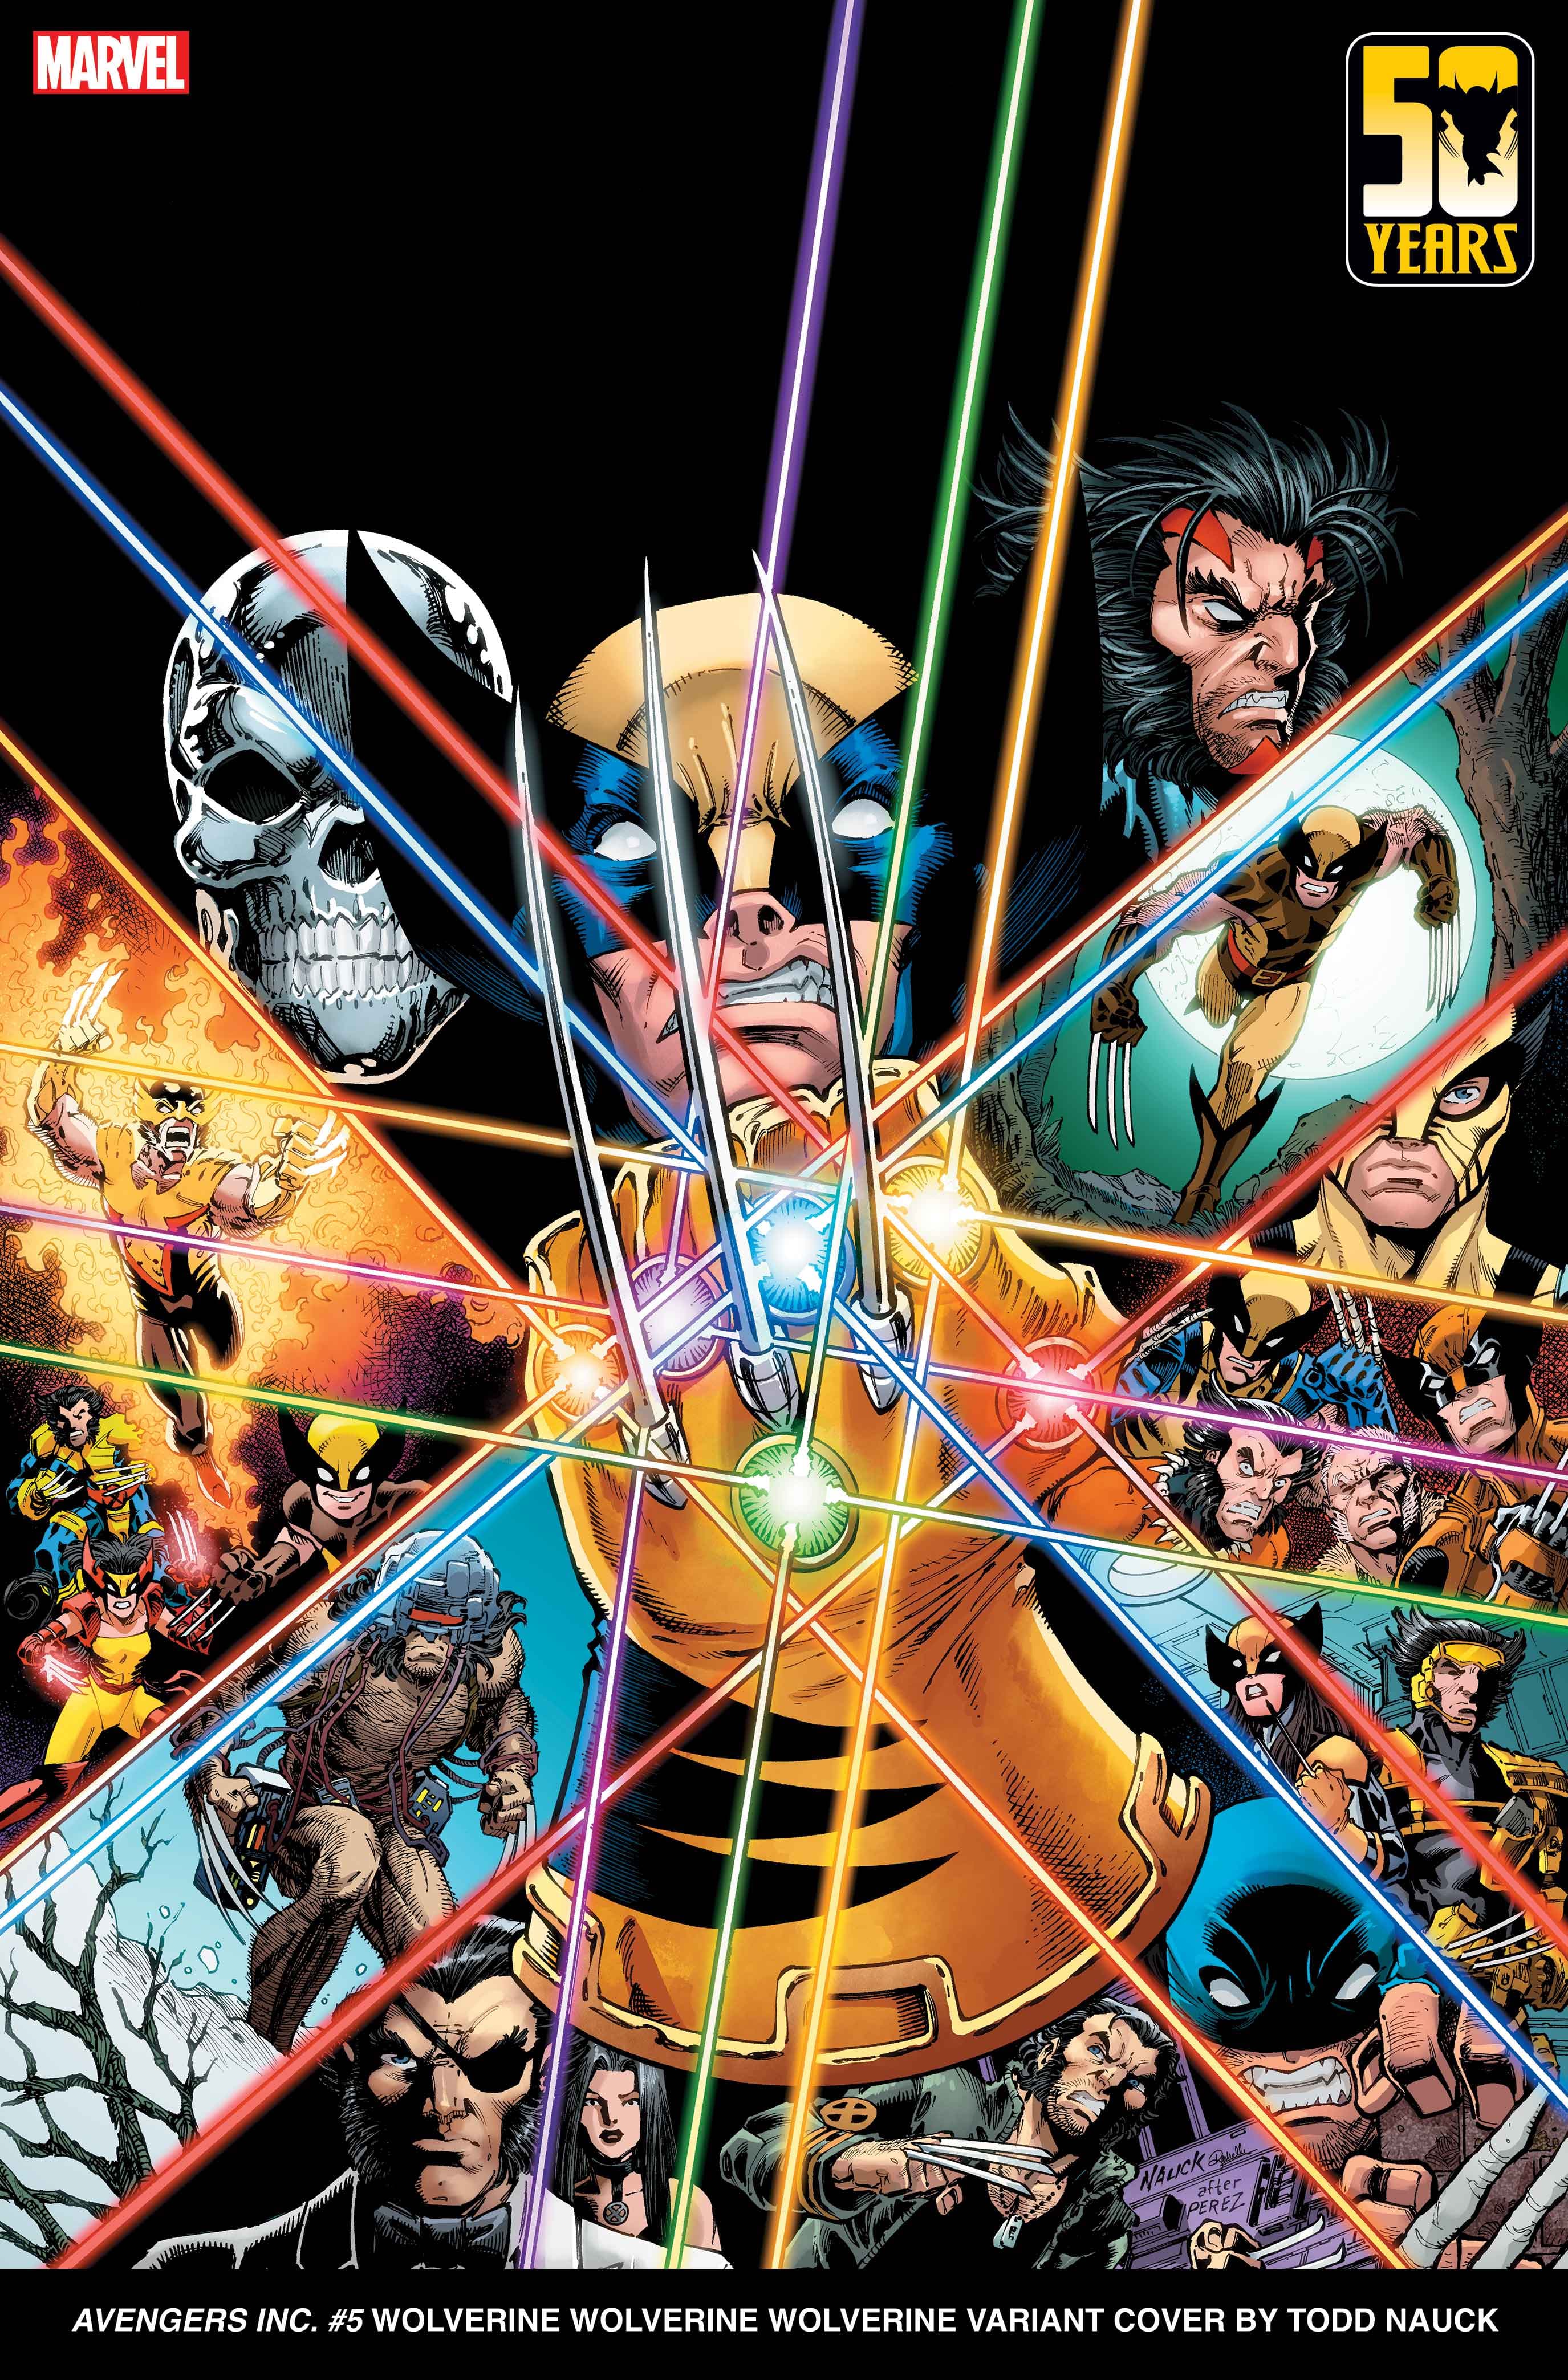 Wolverine Claws His Way Through Marvel History in New Covers | Marvel